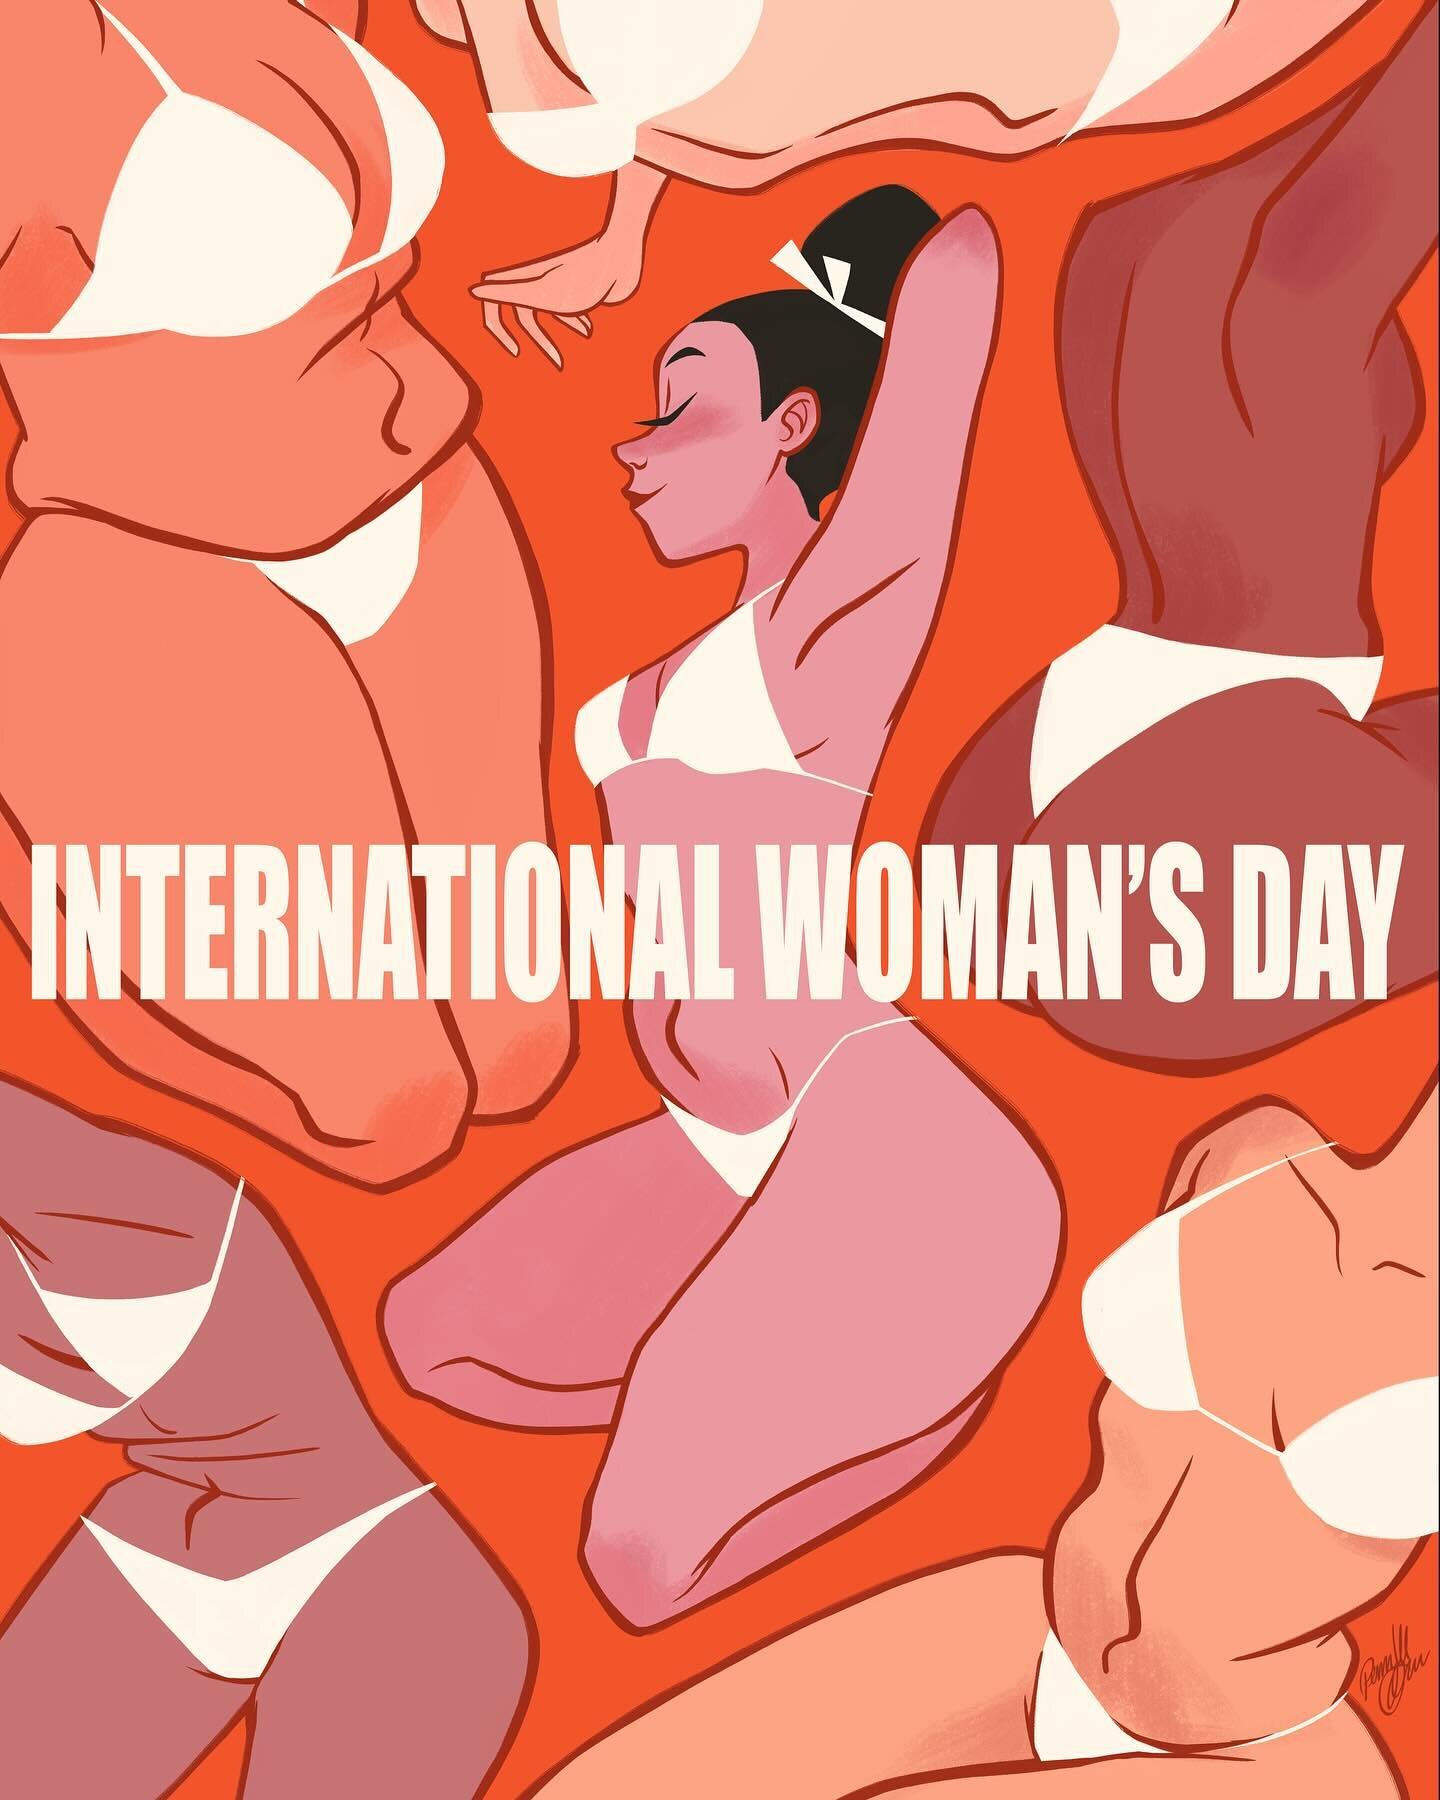 Happy International Woman&rsquo;s Day to all the powerful and wonderful girls, women, mothers, aunties, grandmothers, daughters and everyone else who is embarrassed by this day 🫶 

And remember as Barbie says: 
&ldquo;Every night is girls&rsquo; nig